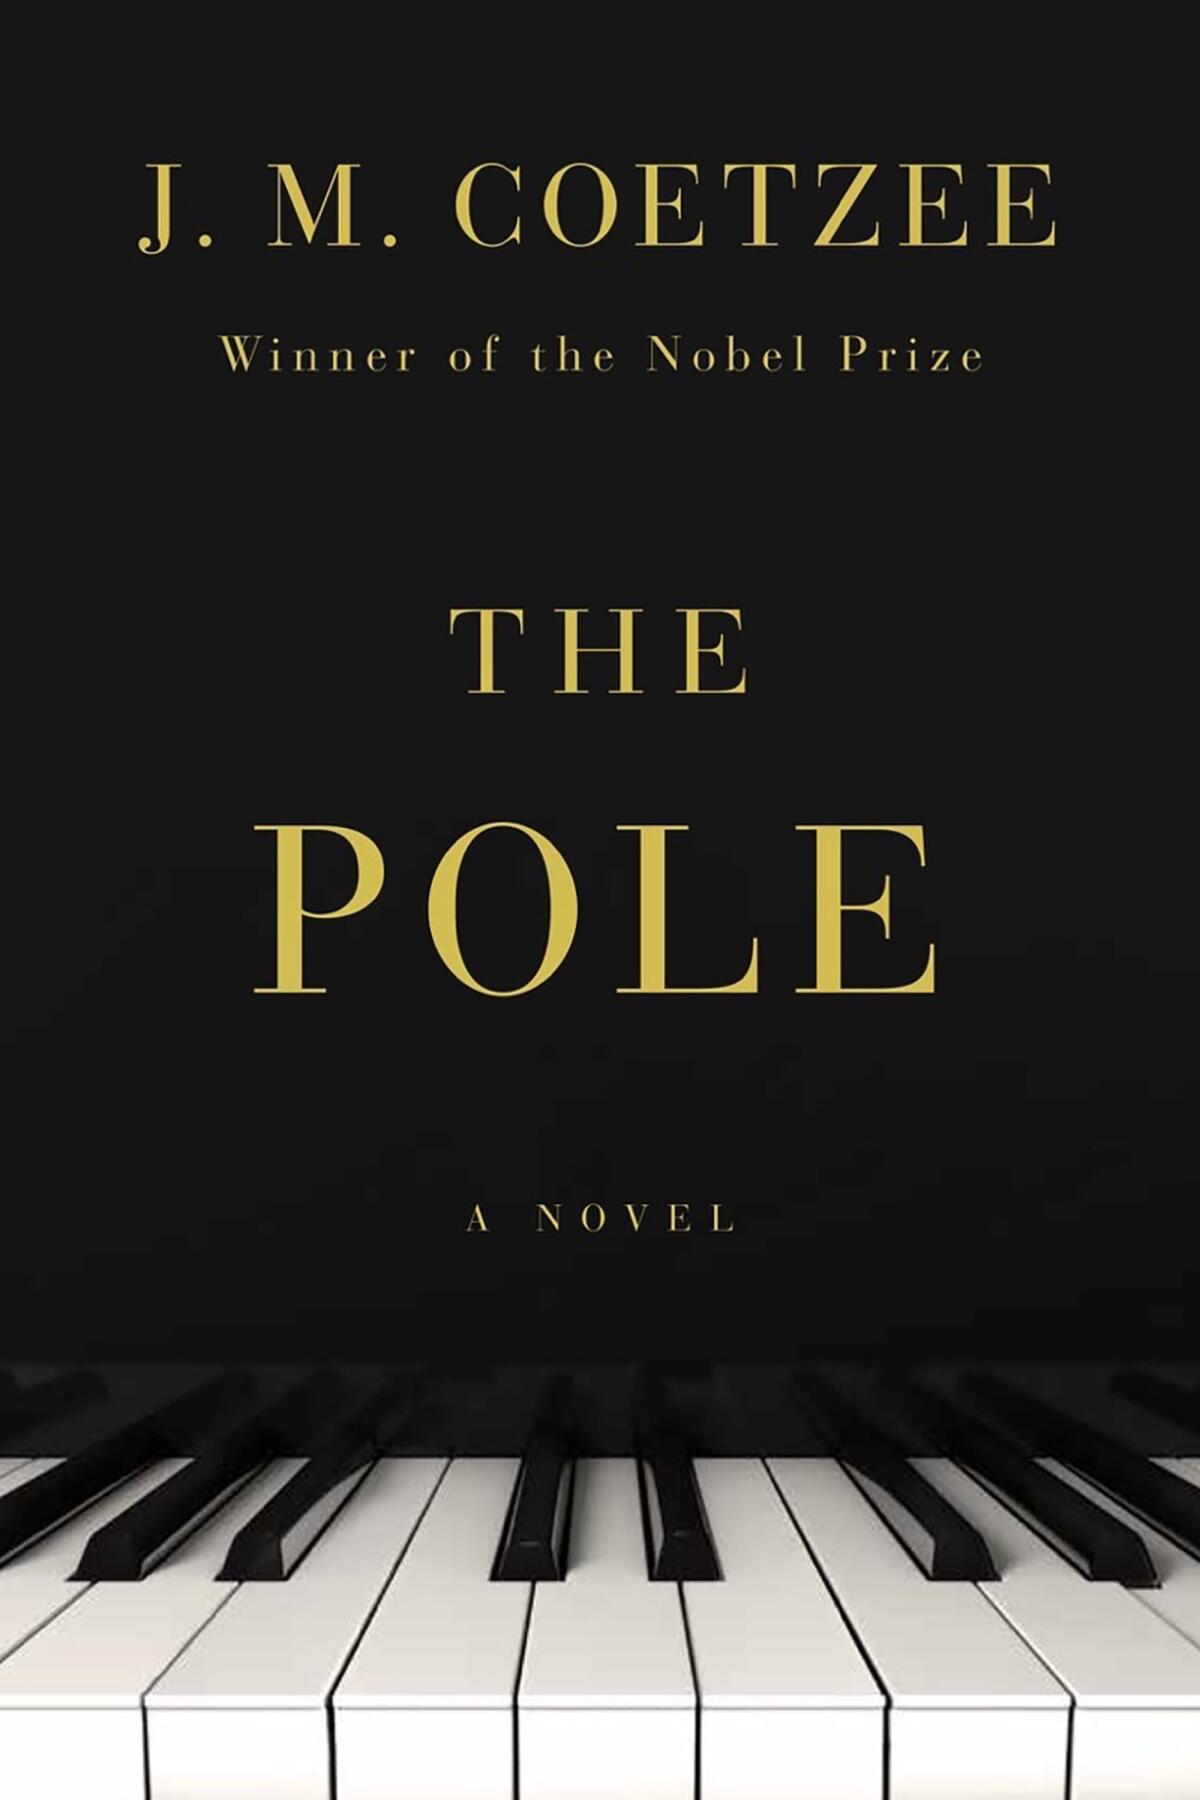 "The Pole," by J. M. Coetzee